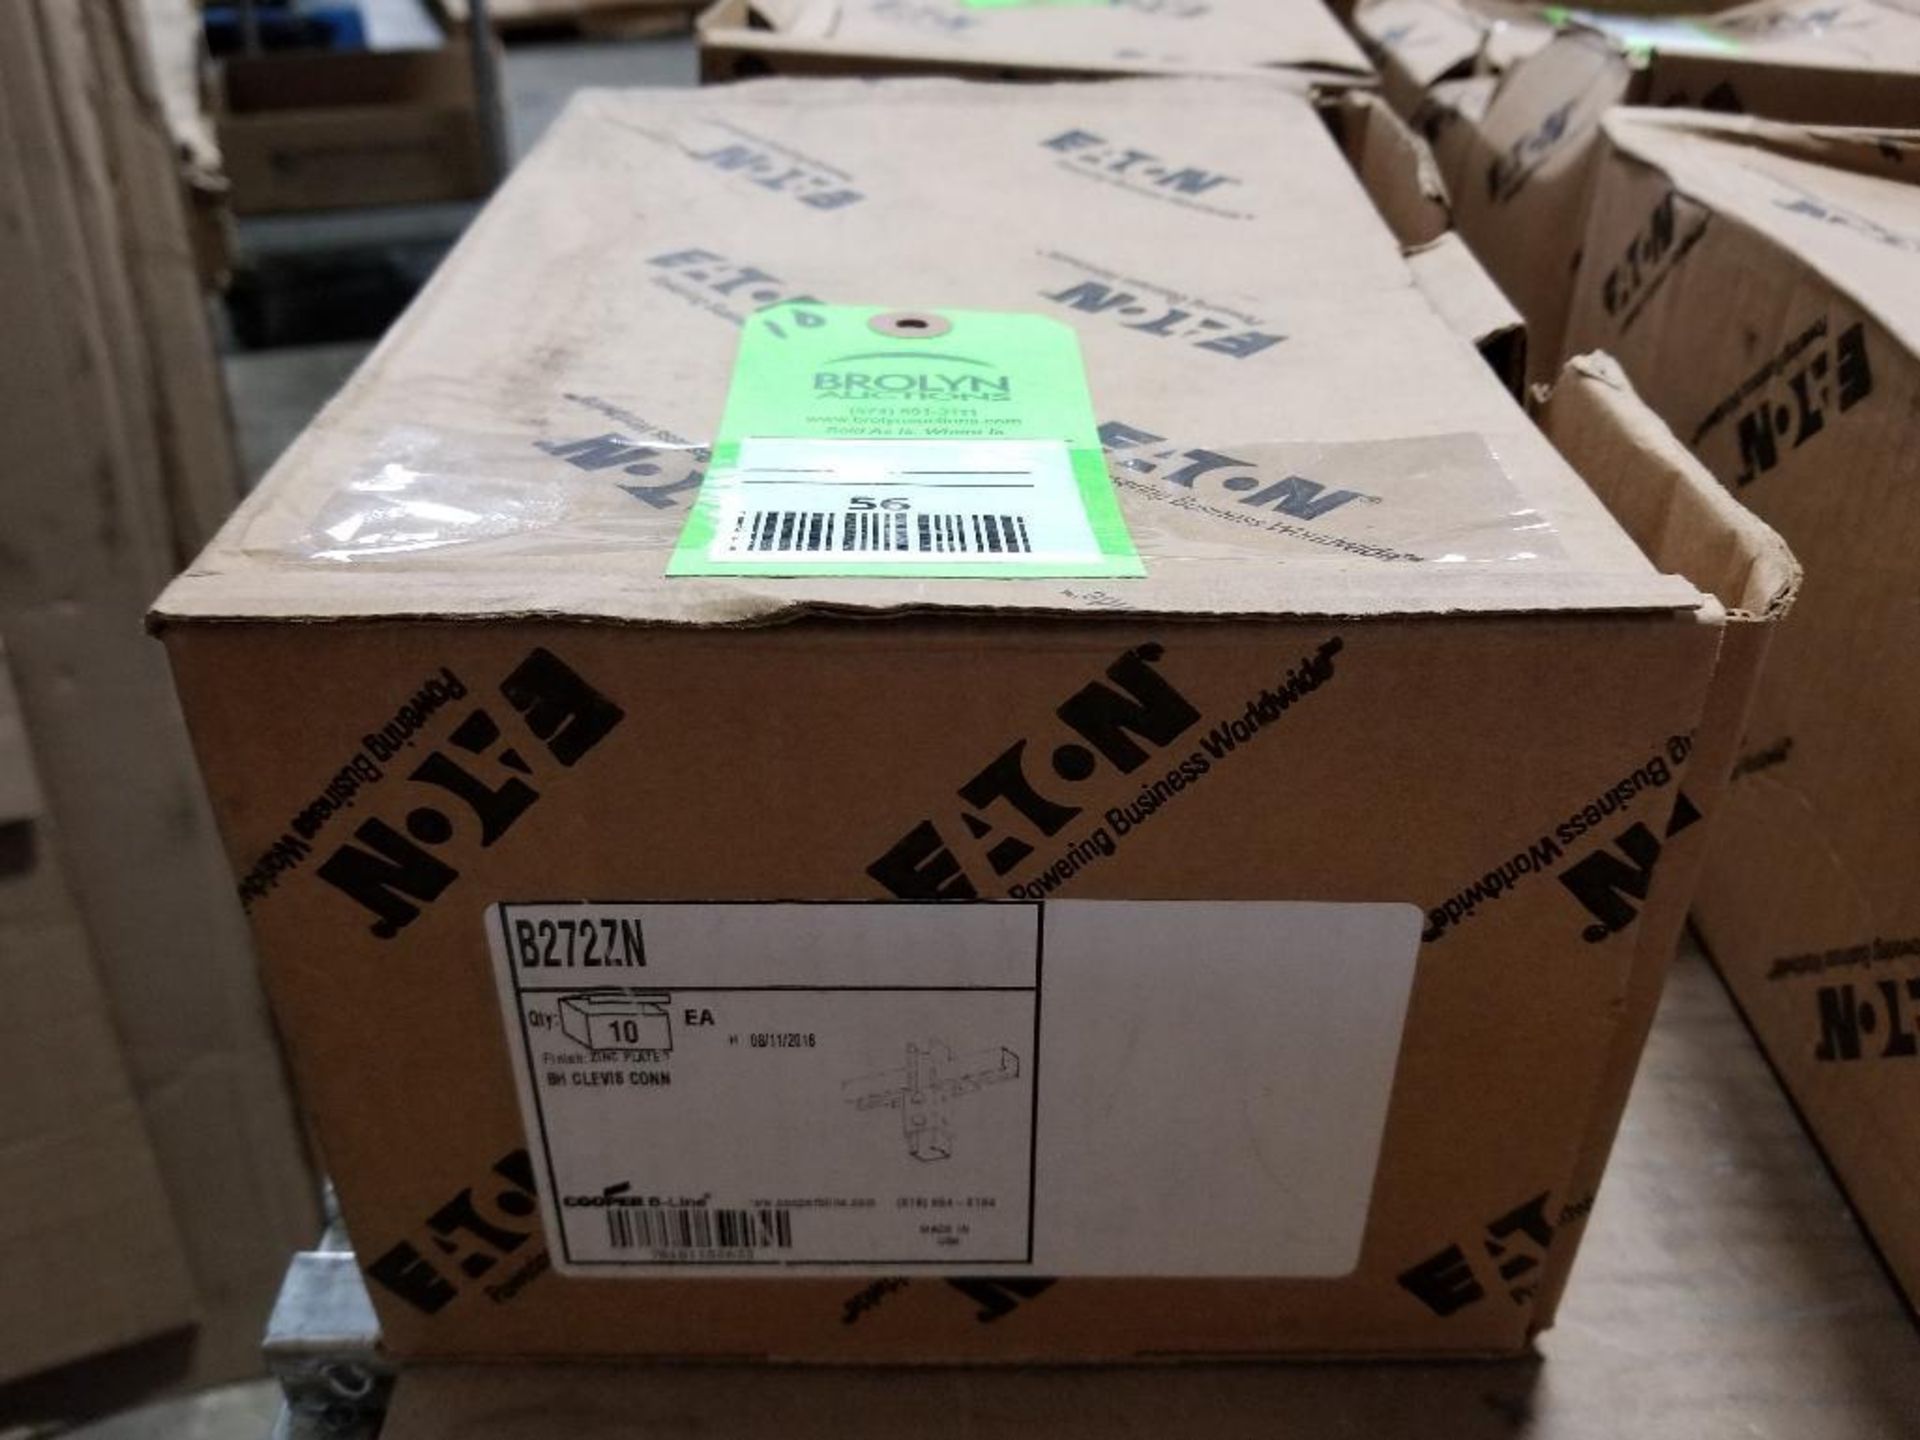 Qty 10 - Eaton connector. New in bulk box.